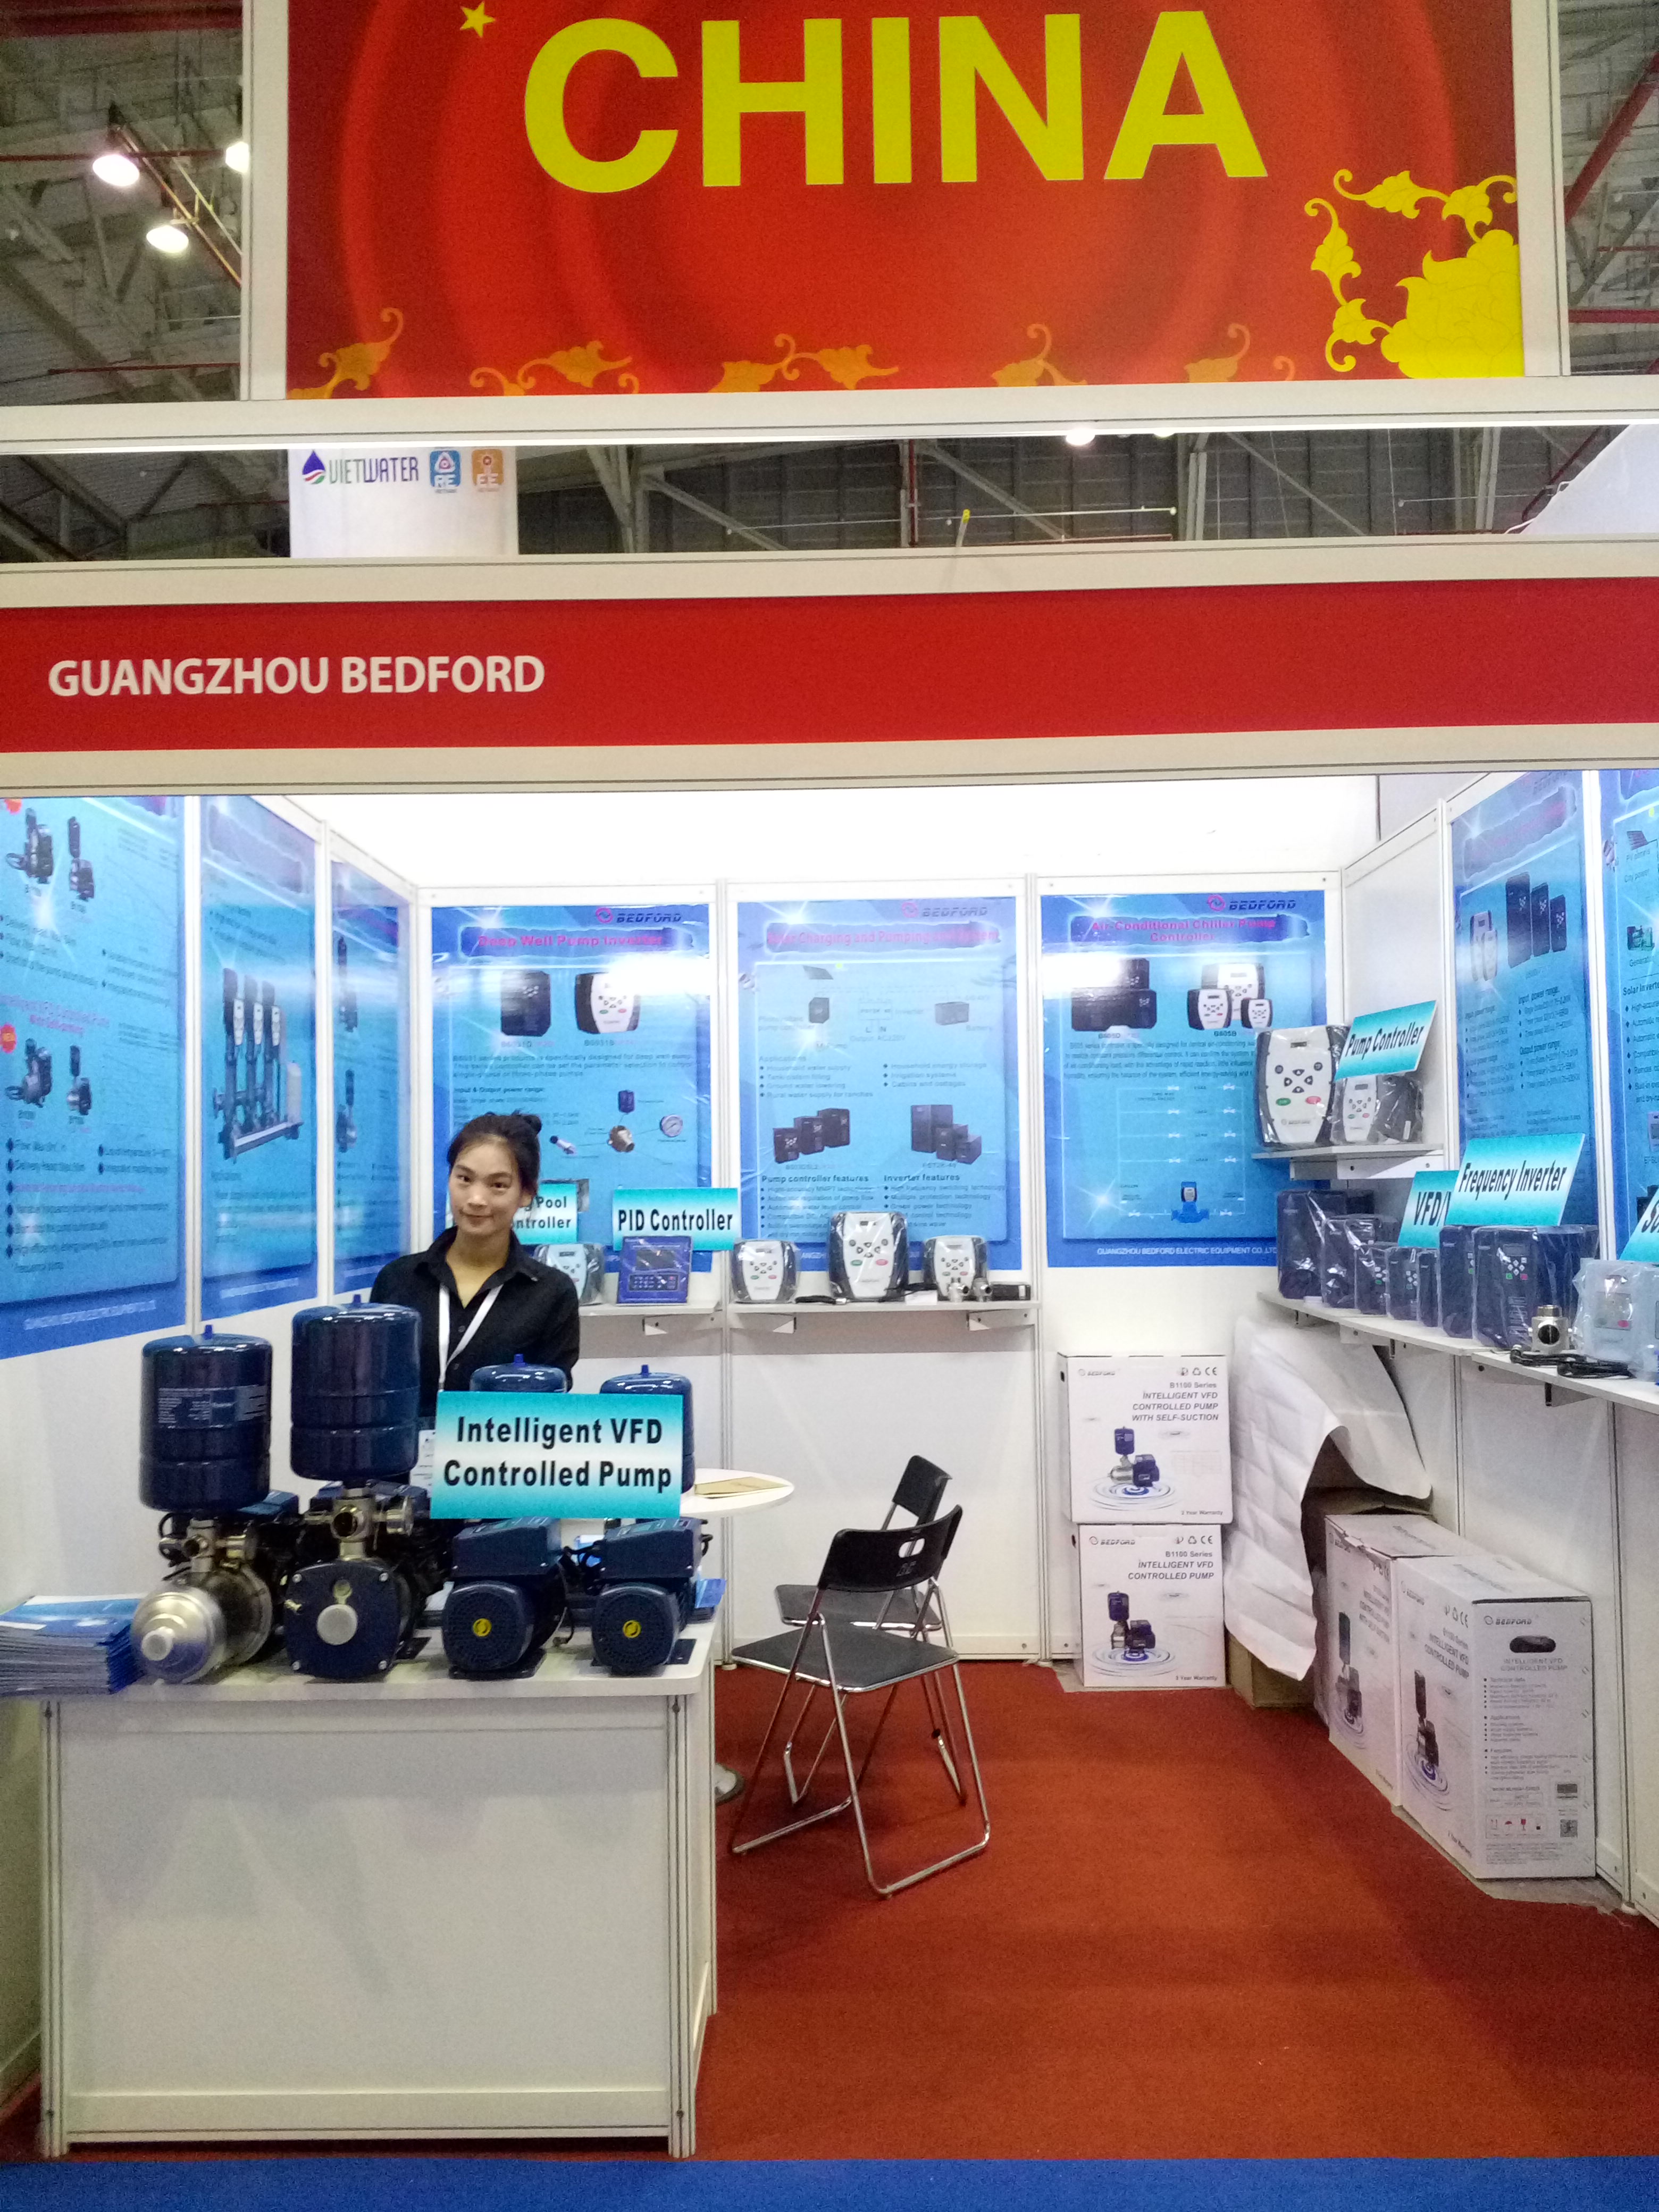 2019.7.24-2019.7.26, participated in the 2019 Vietnam International Water Treatment Exhibition 